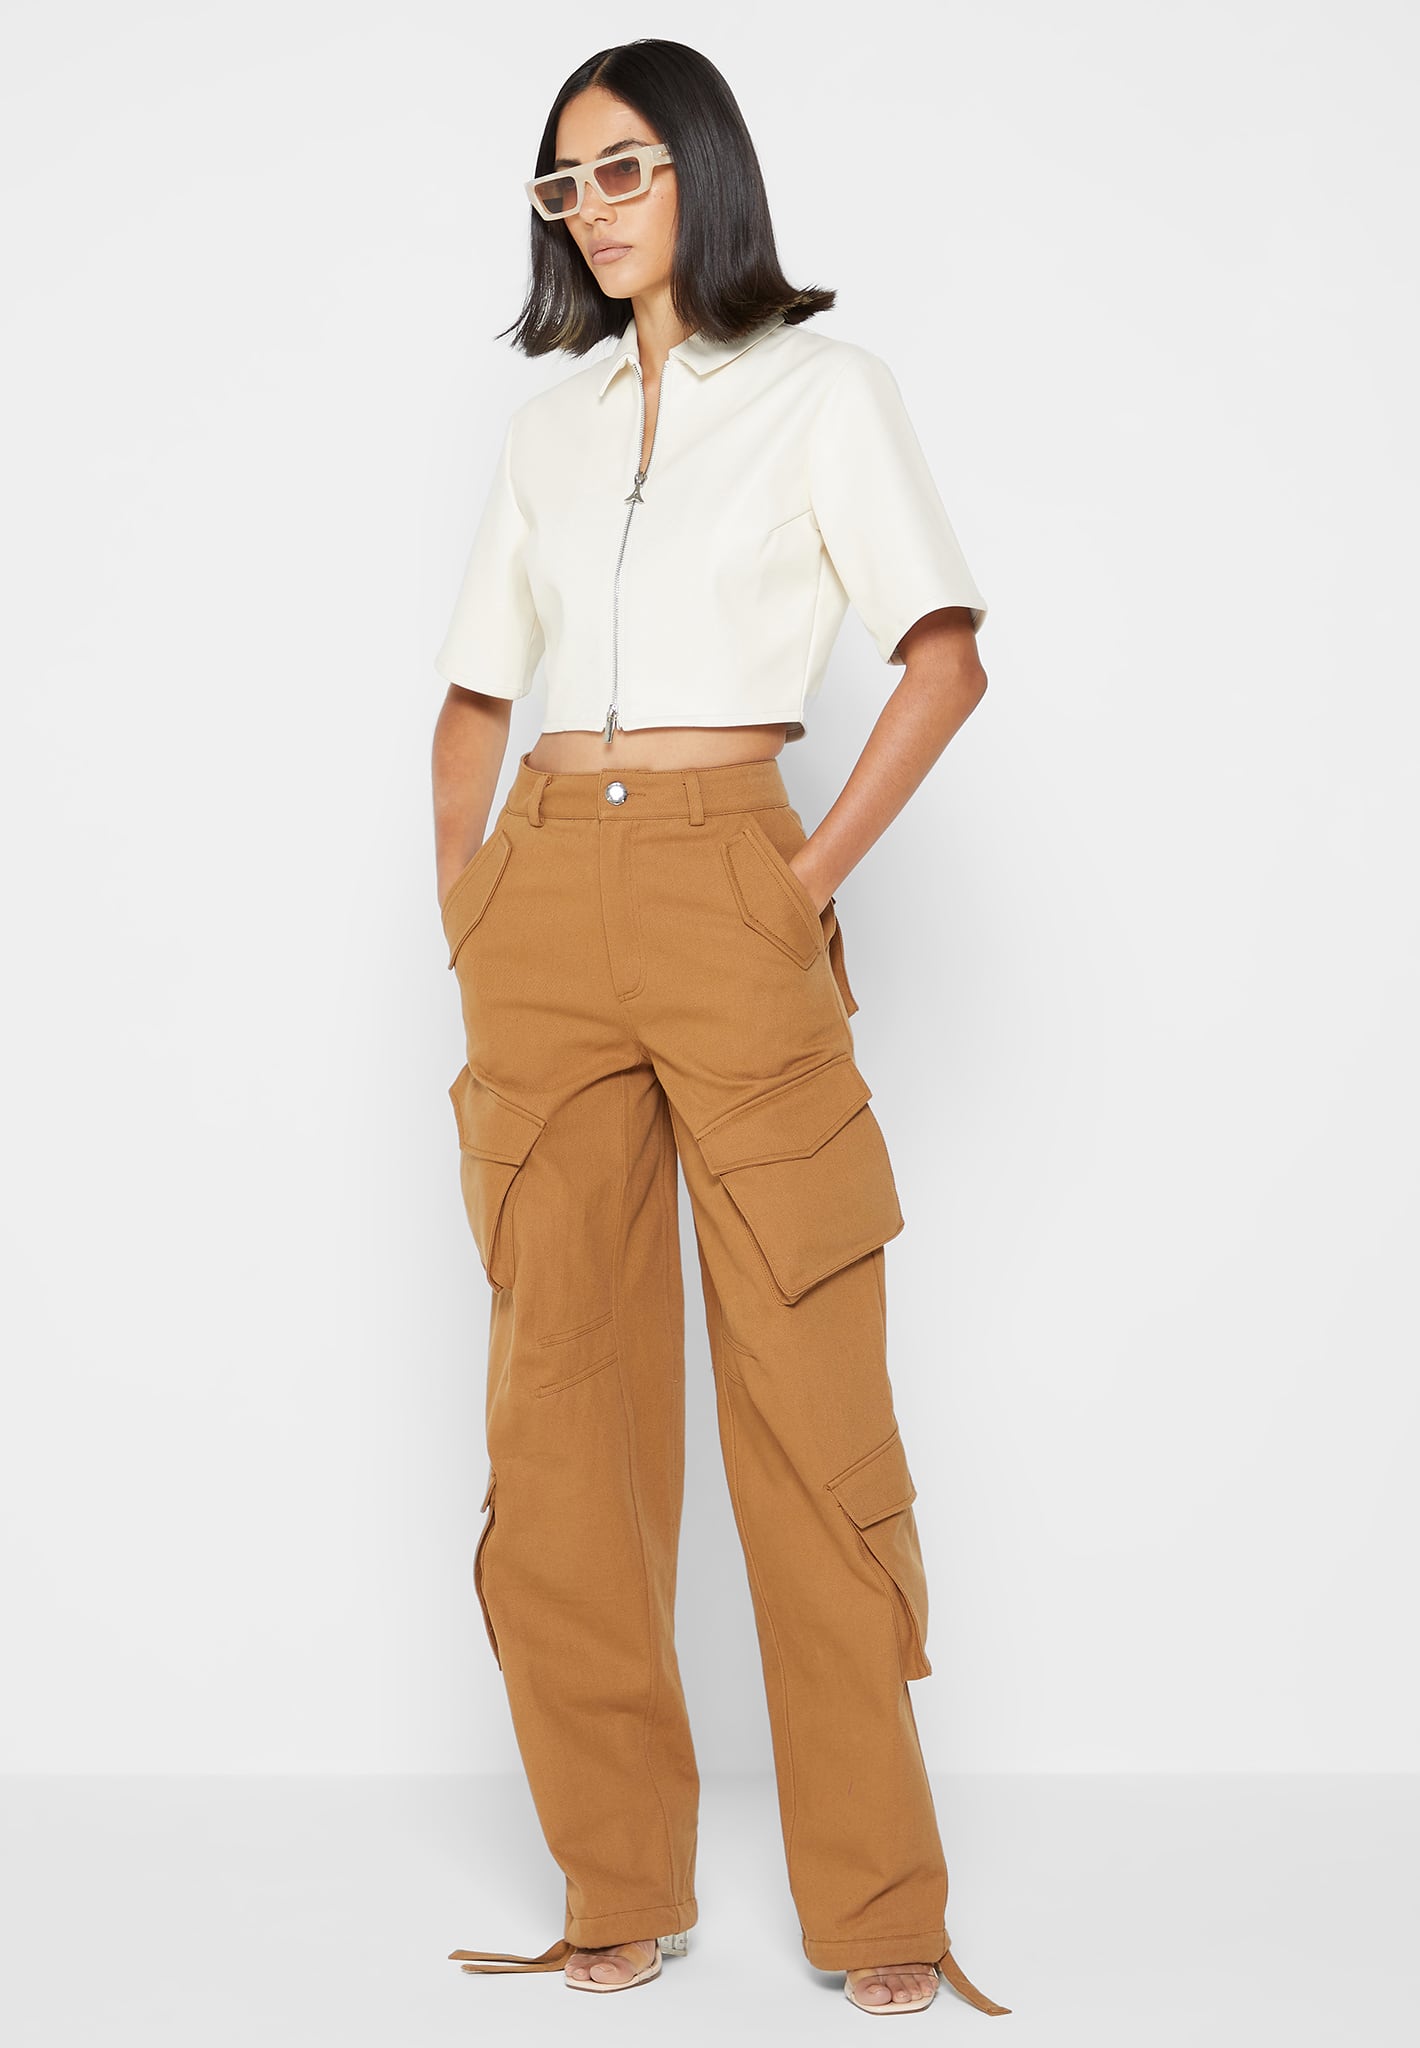 Bershka utility cargo trouser in beige | ASOS | Cargo pants outfit, Earth  clothes, Brown cargo pants outfit